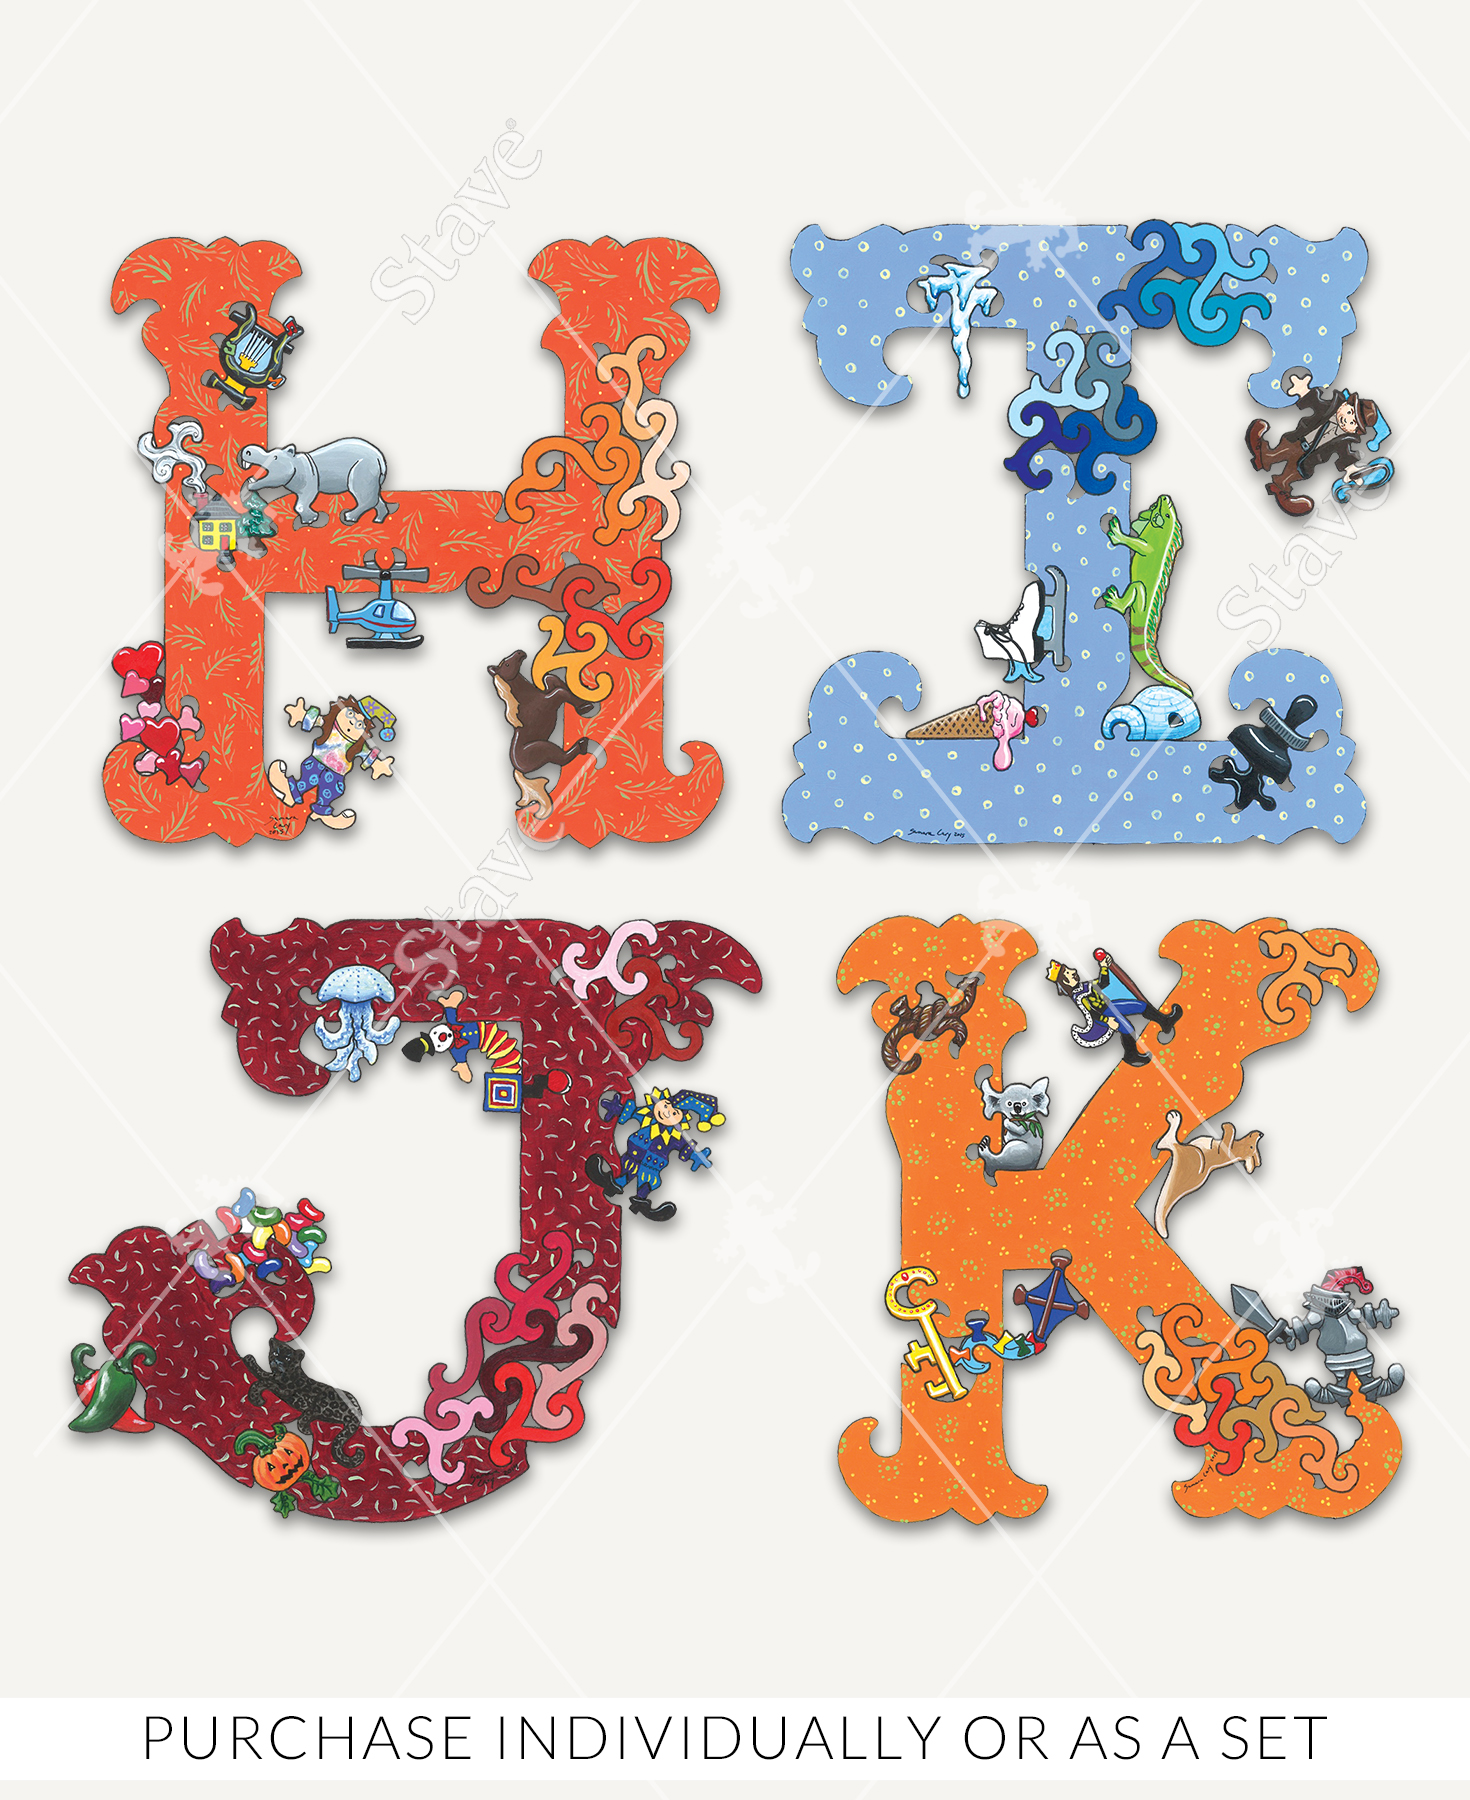 Letters H, I, J, and K from the Alphabet Soup wooden jigsaw puzzle collection.